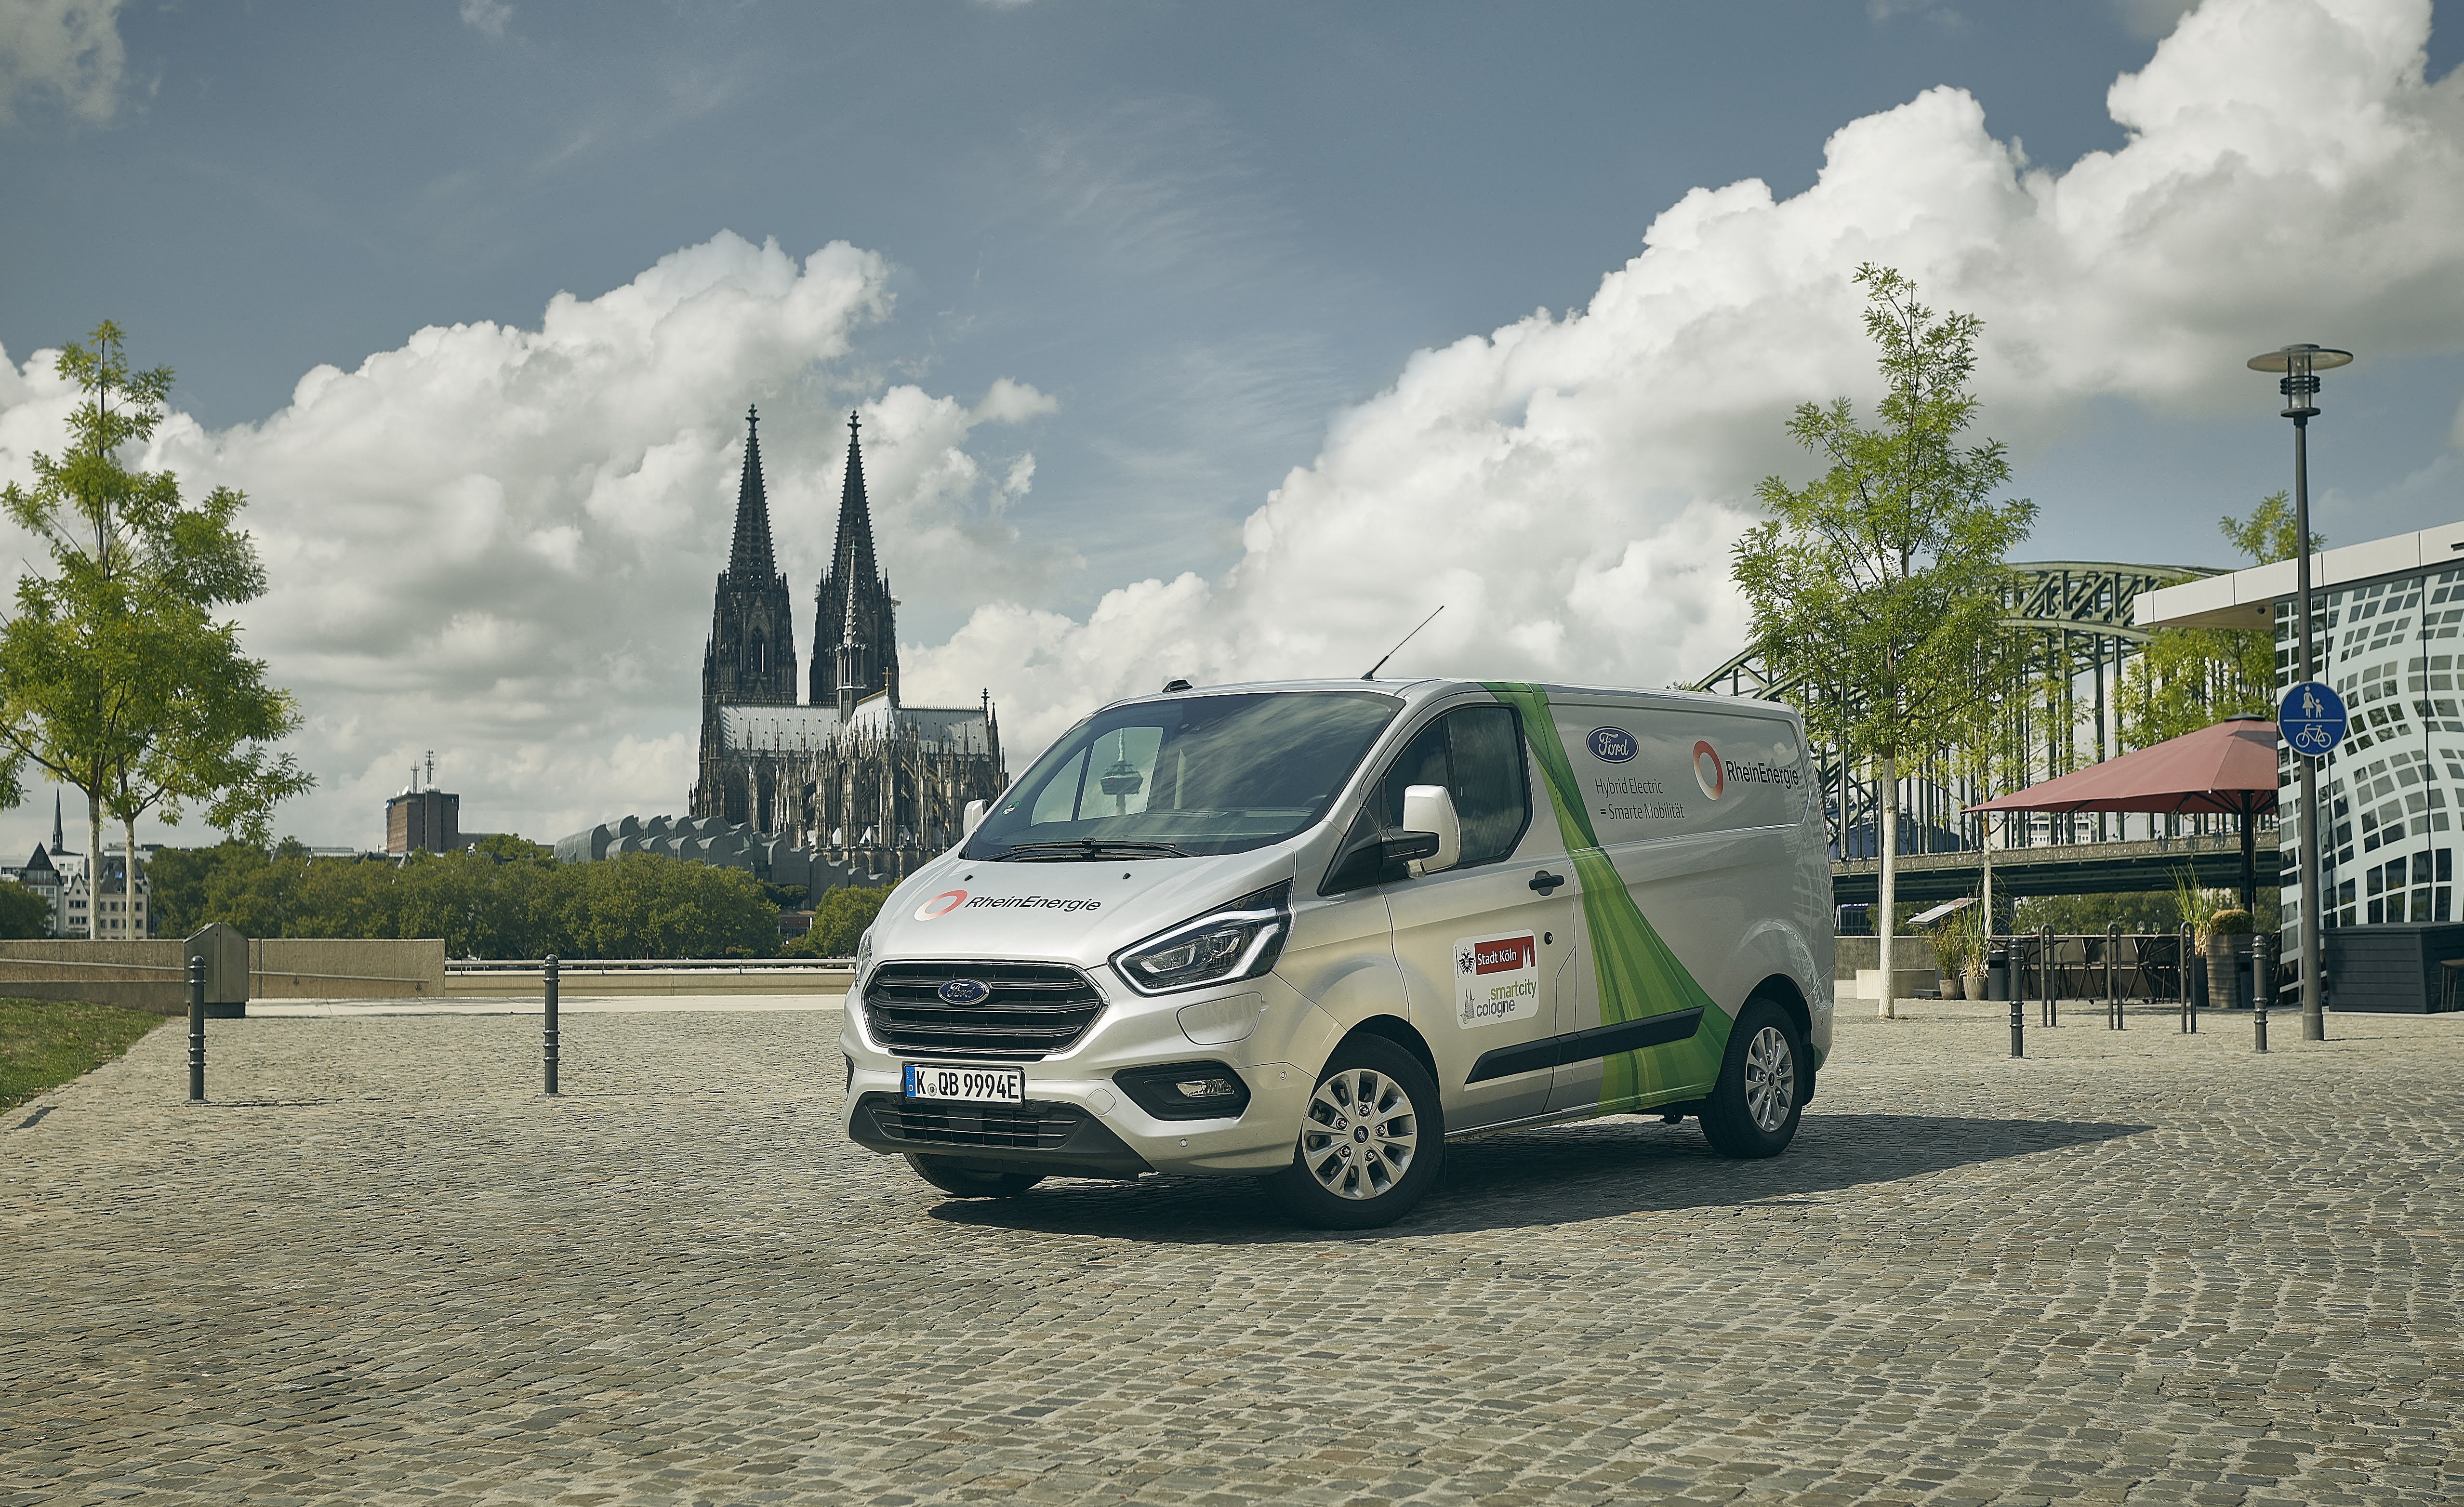 Hybrid van research delivers insight into future of our cities